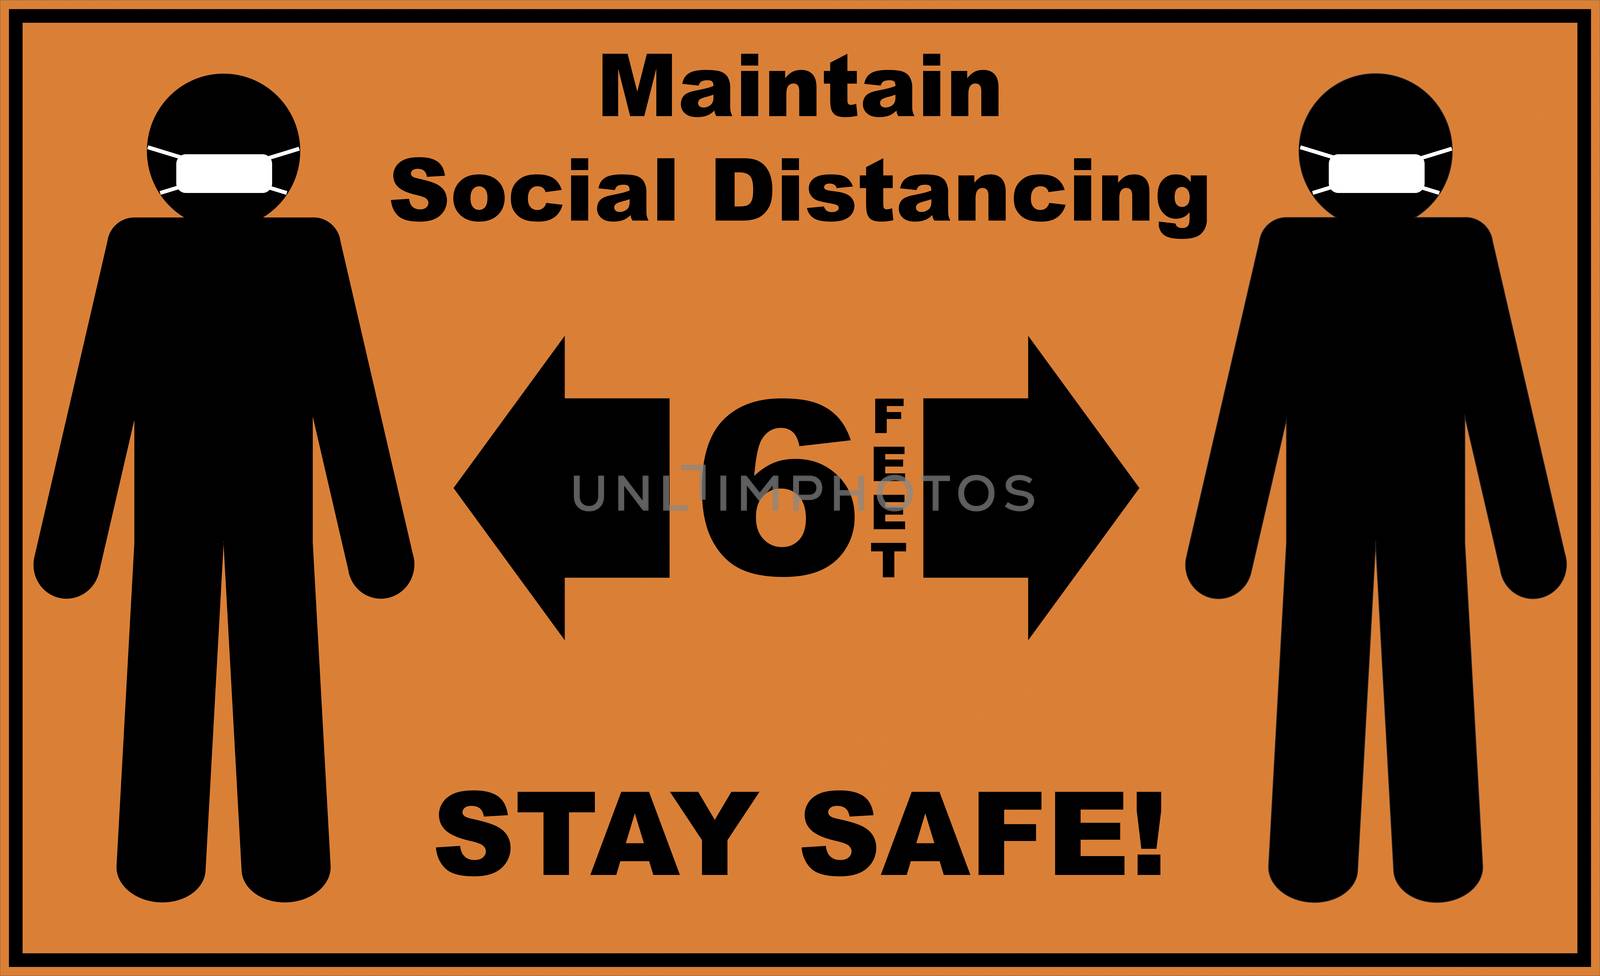 Social distance sign board with two silhouettes of men wearing masks and text asking to maintain 6 feet of social distancing